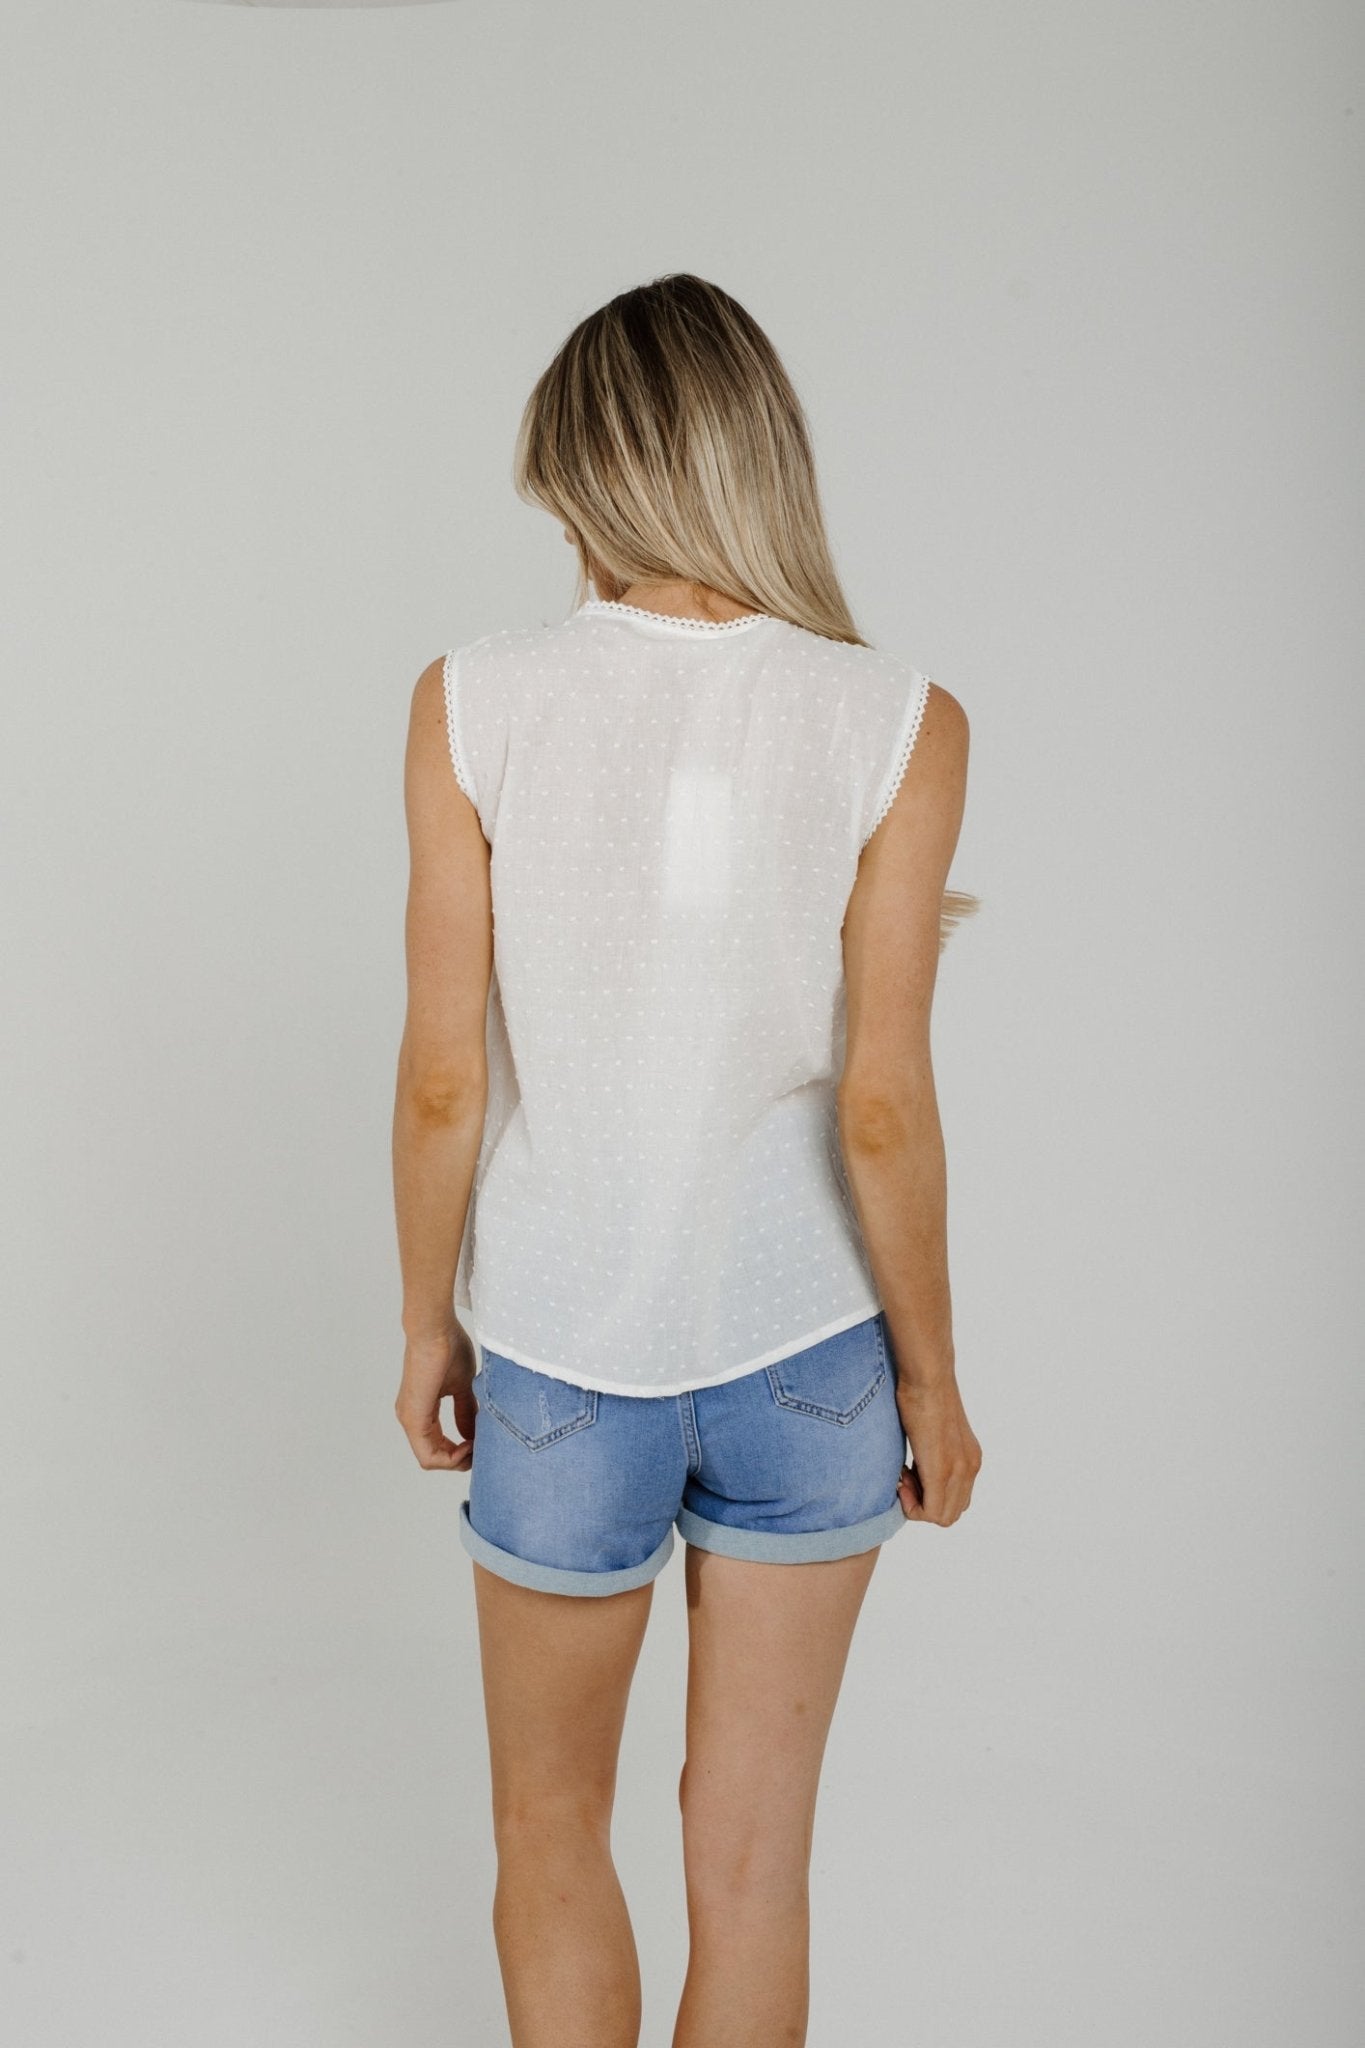 Jane Embroidered Top In White - The Walk in Wardrobe